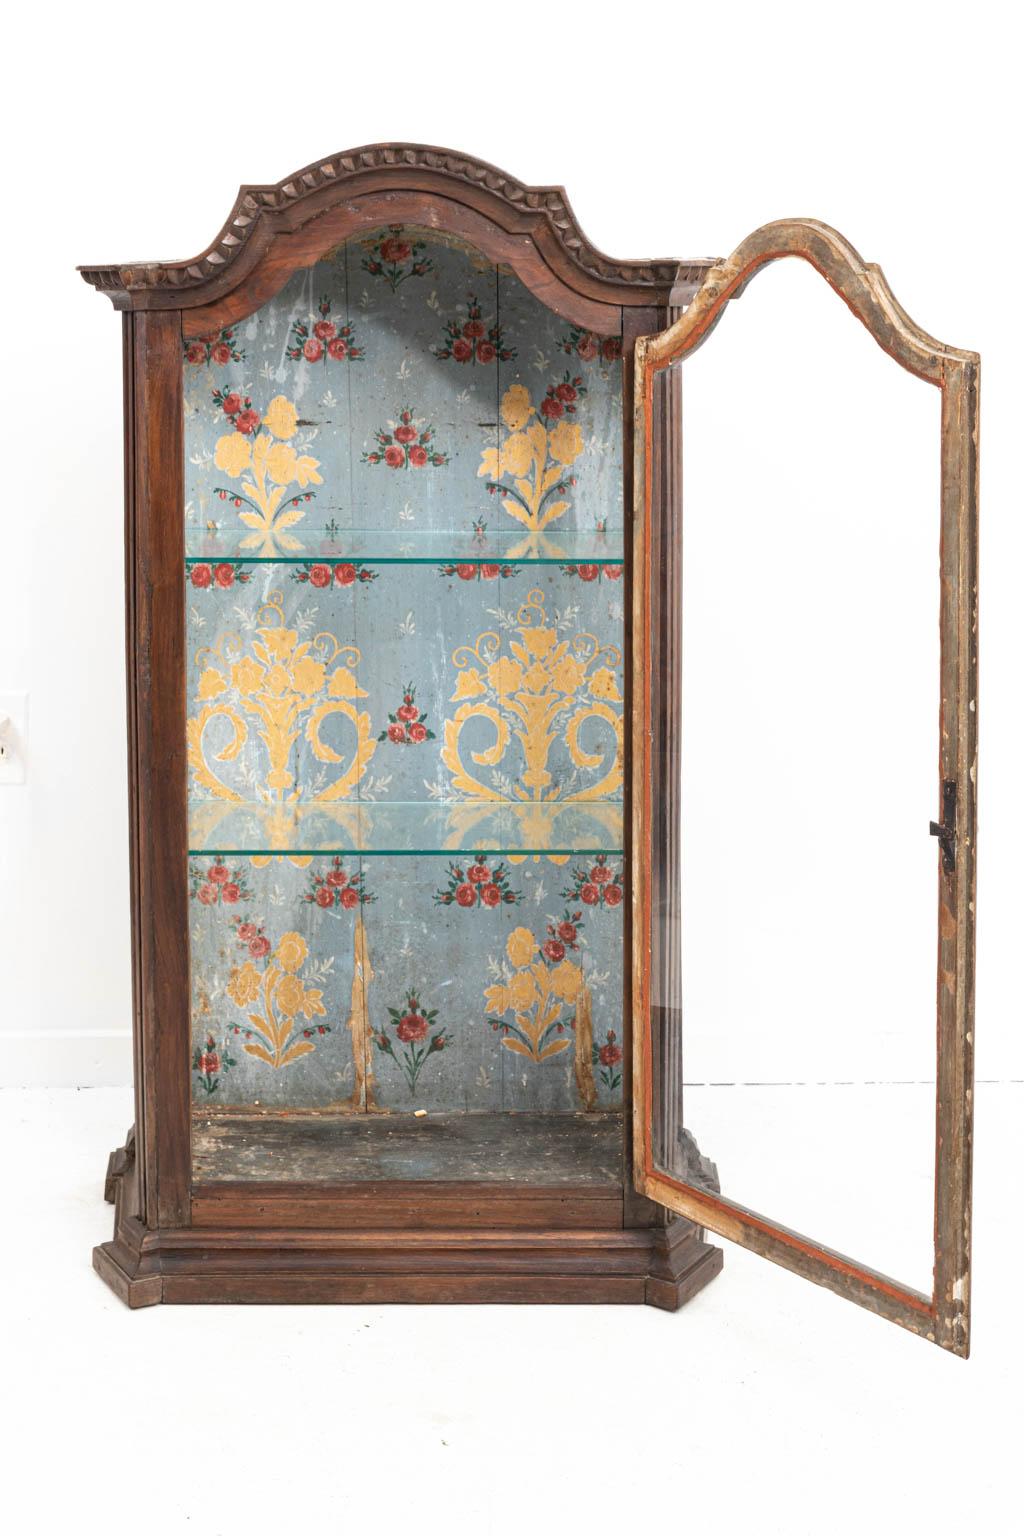 Italian vitrine wall cabinet in walnut with paint decorated interior of flowers and glass shelves, circa early 19th century. The piece also features a glass front. Please note of wear consistent with age including paint loss and finish loss to the